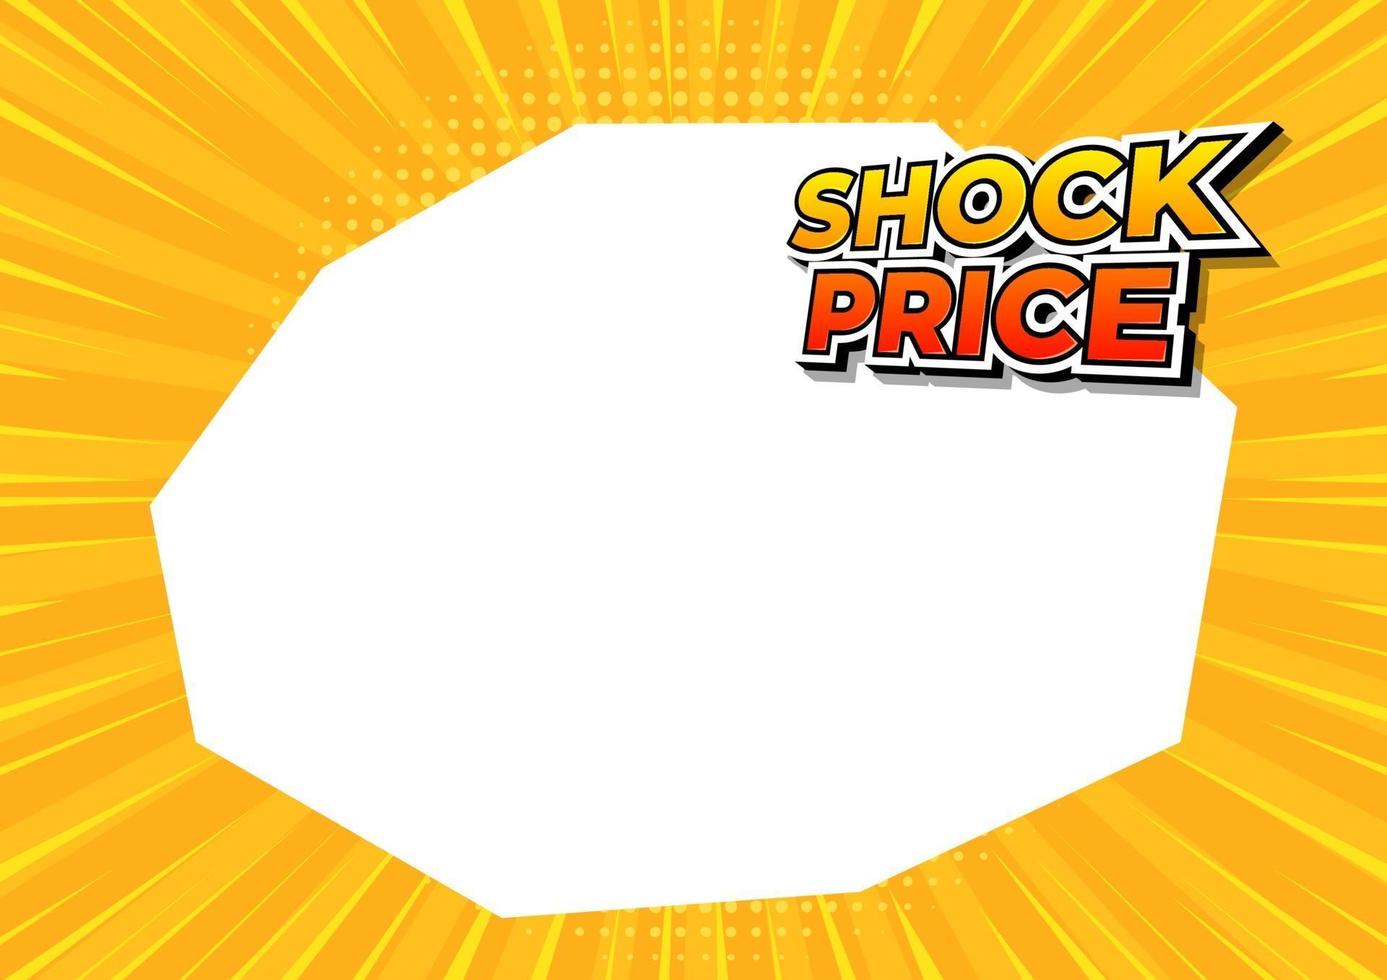 Shock price on yellow comics background banner. Shock price design template. vector